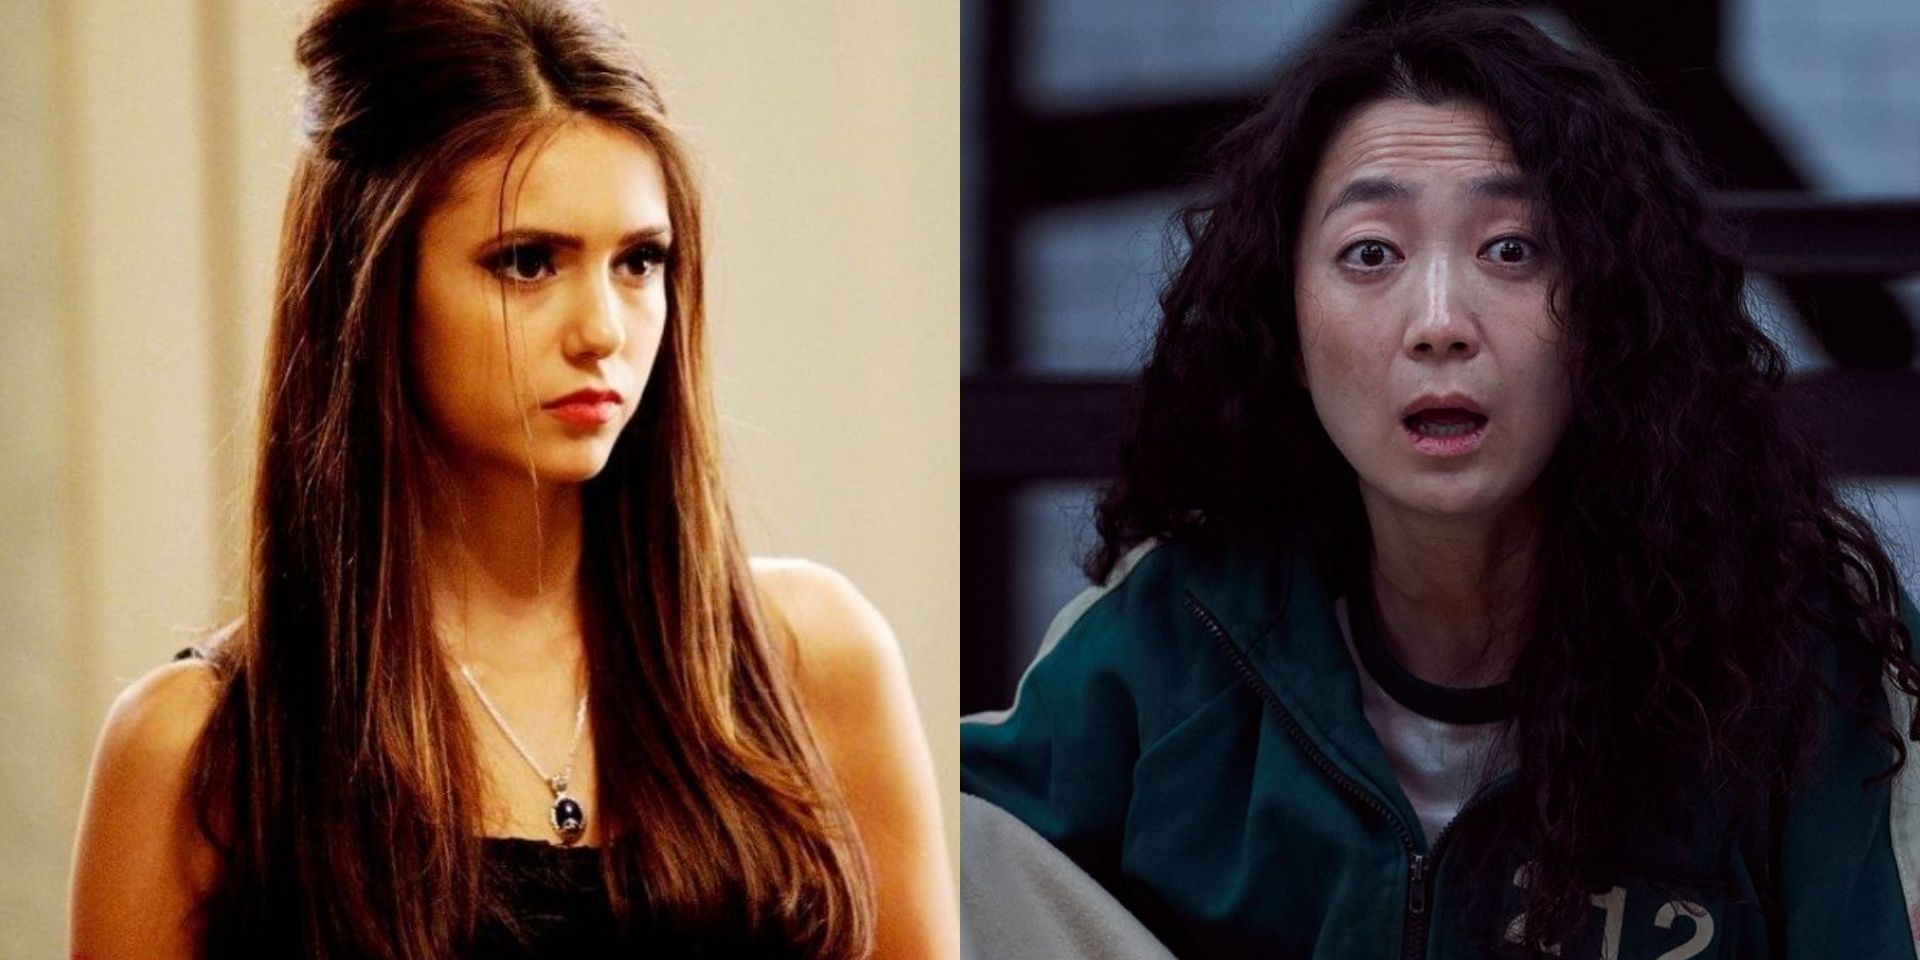 Katherine and mi nyeo in vampire diaries and squid game